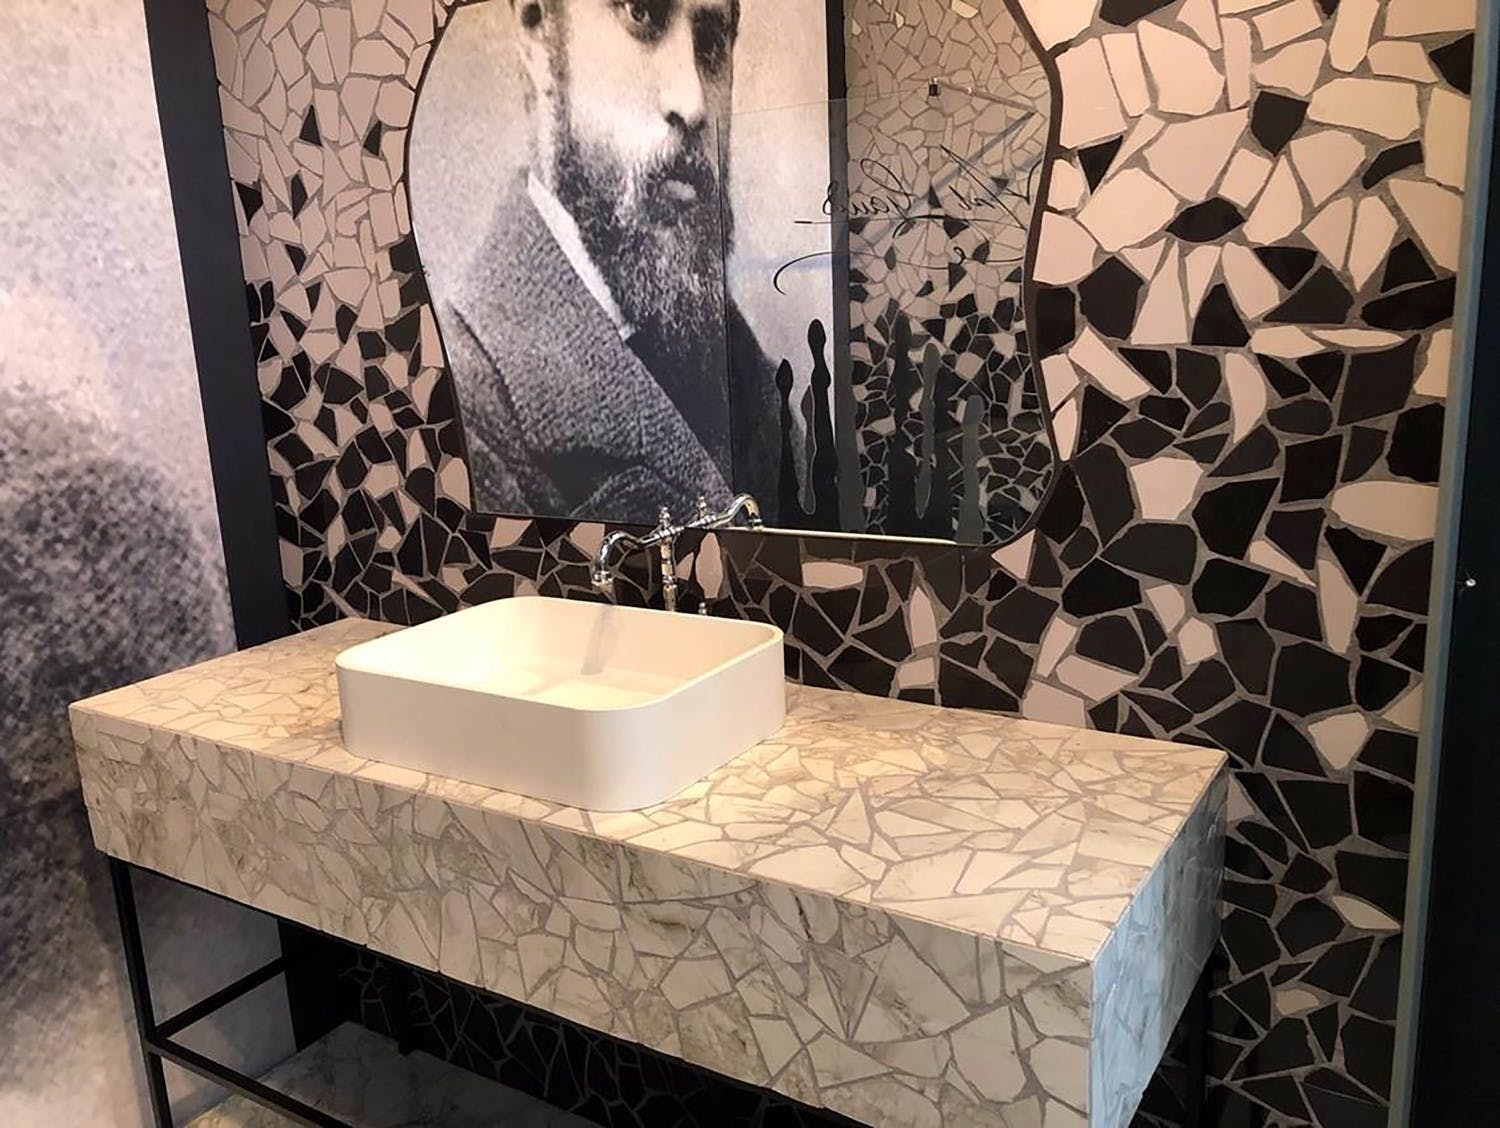 Image of Stand Cosentino Cersaie 2019 2 baja 2 in The Cosentino Group debuts at Cersaie 2019 as part of the "Famous Bathrooms" exhibition - Cosentino